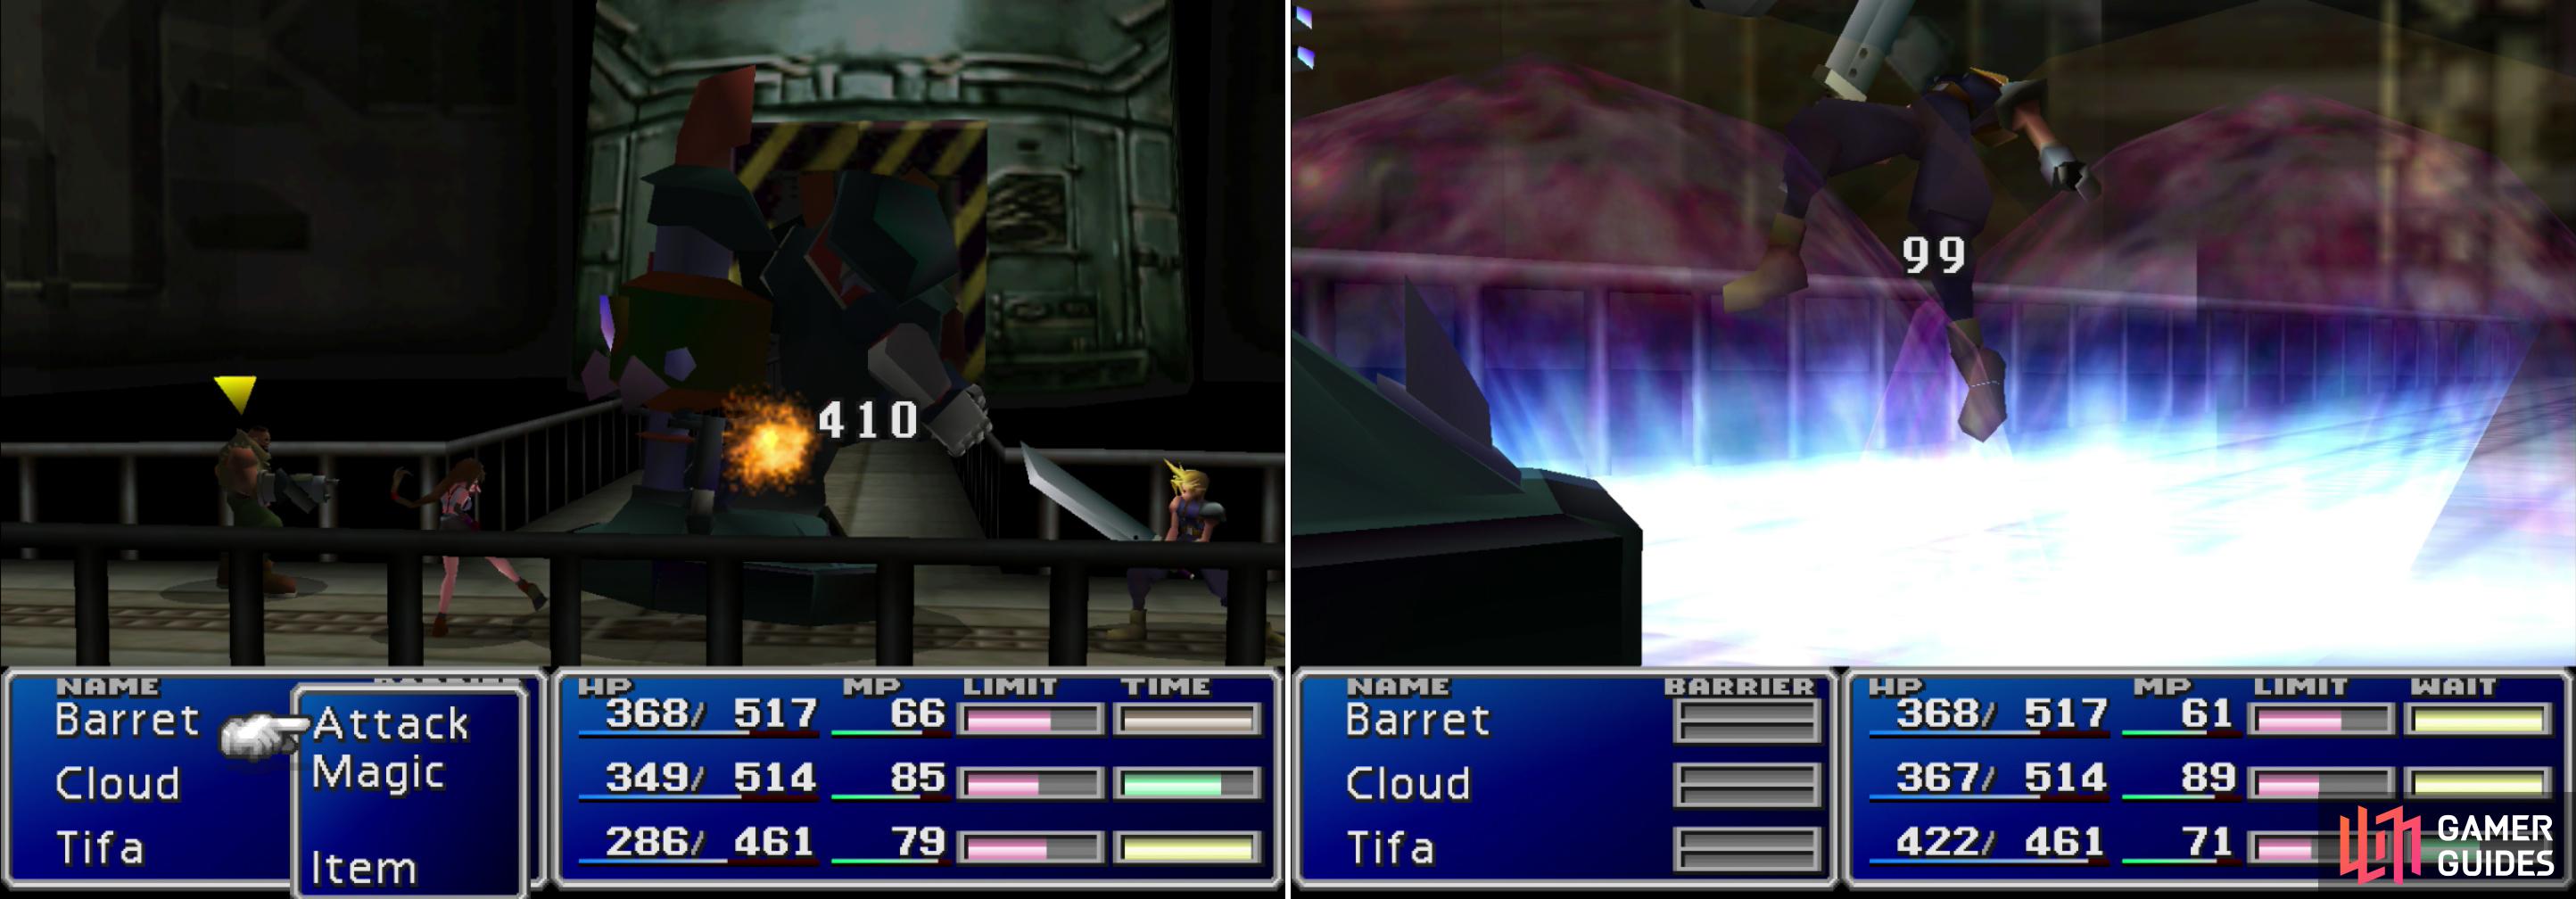 Attack Air Buster from behind to deal massive damage (left). Air Buster's "Big Bomber" attack can be quite painful (right).